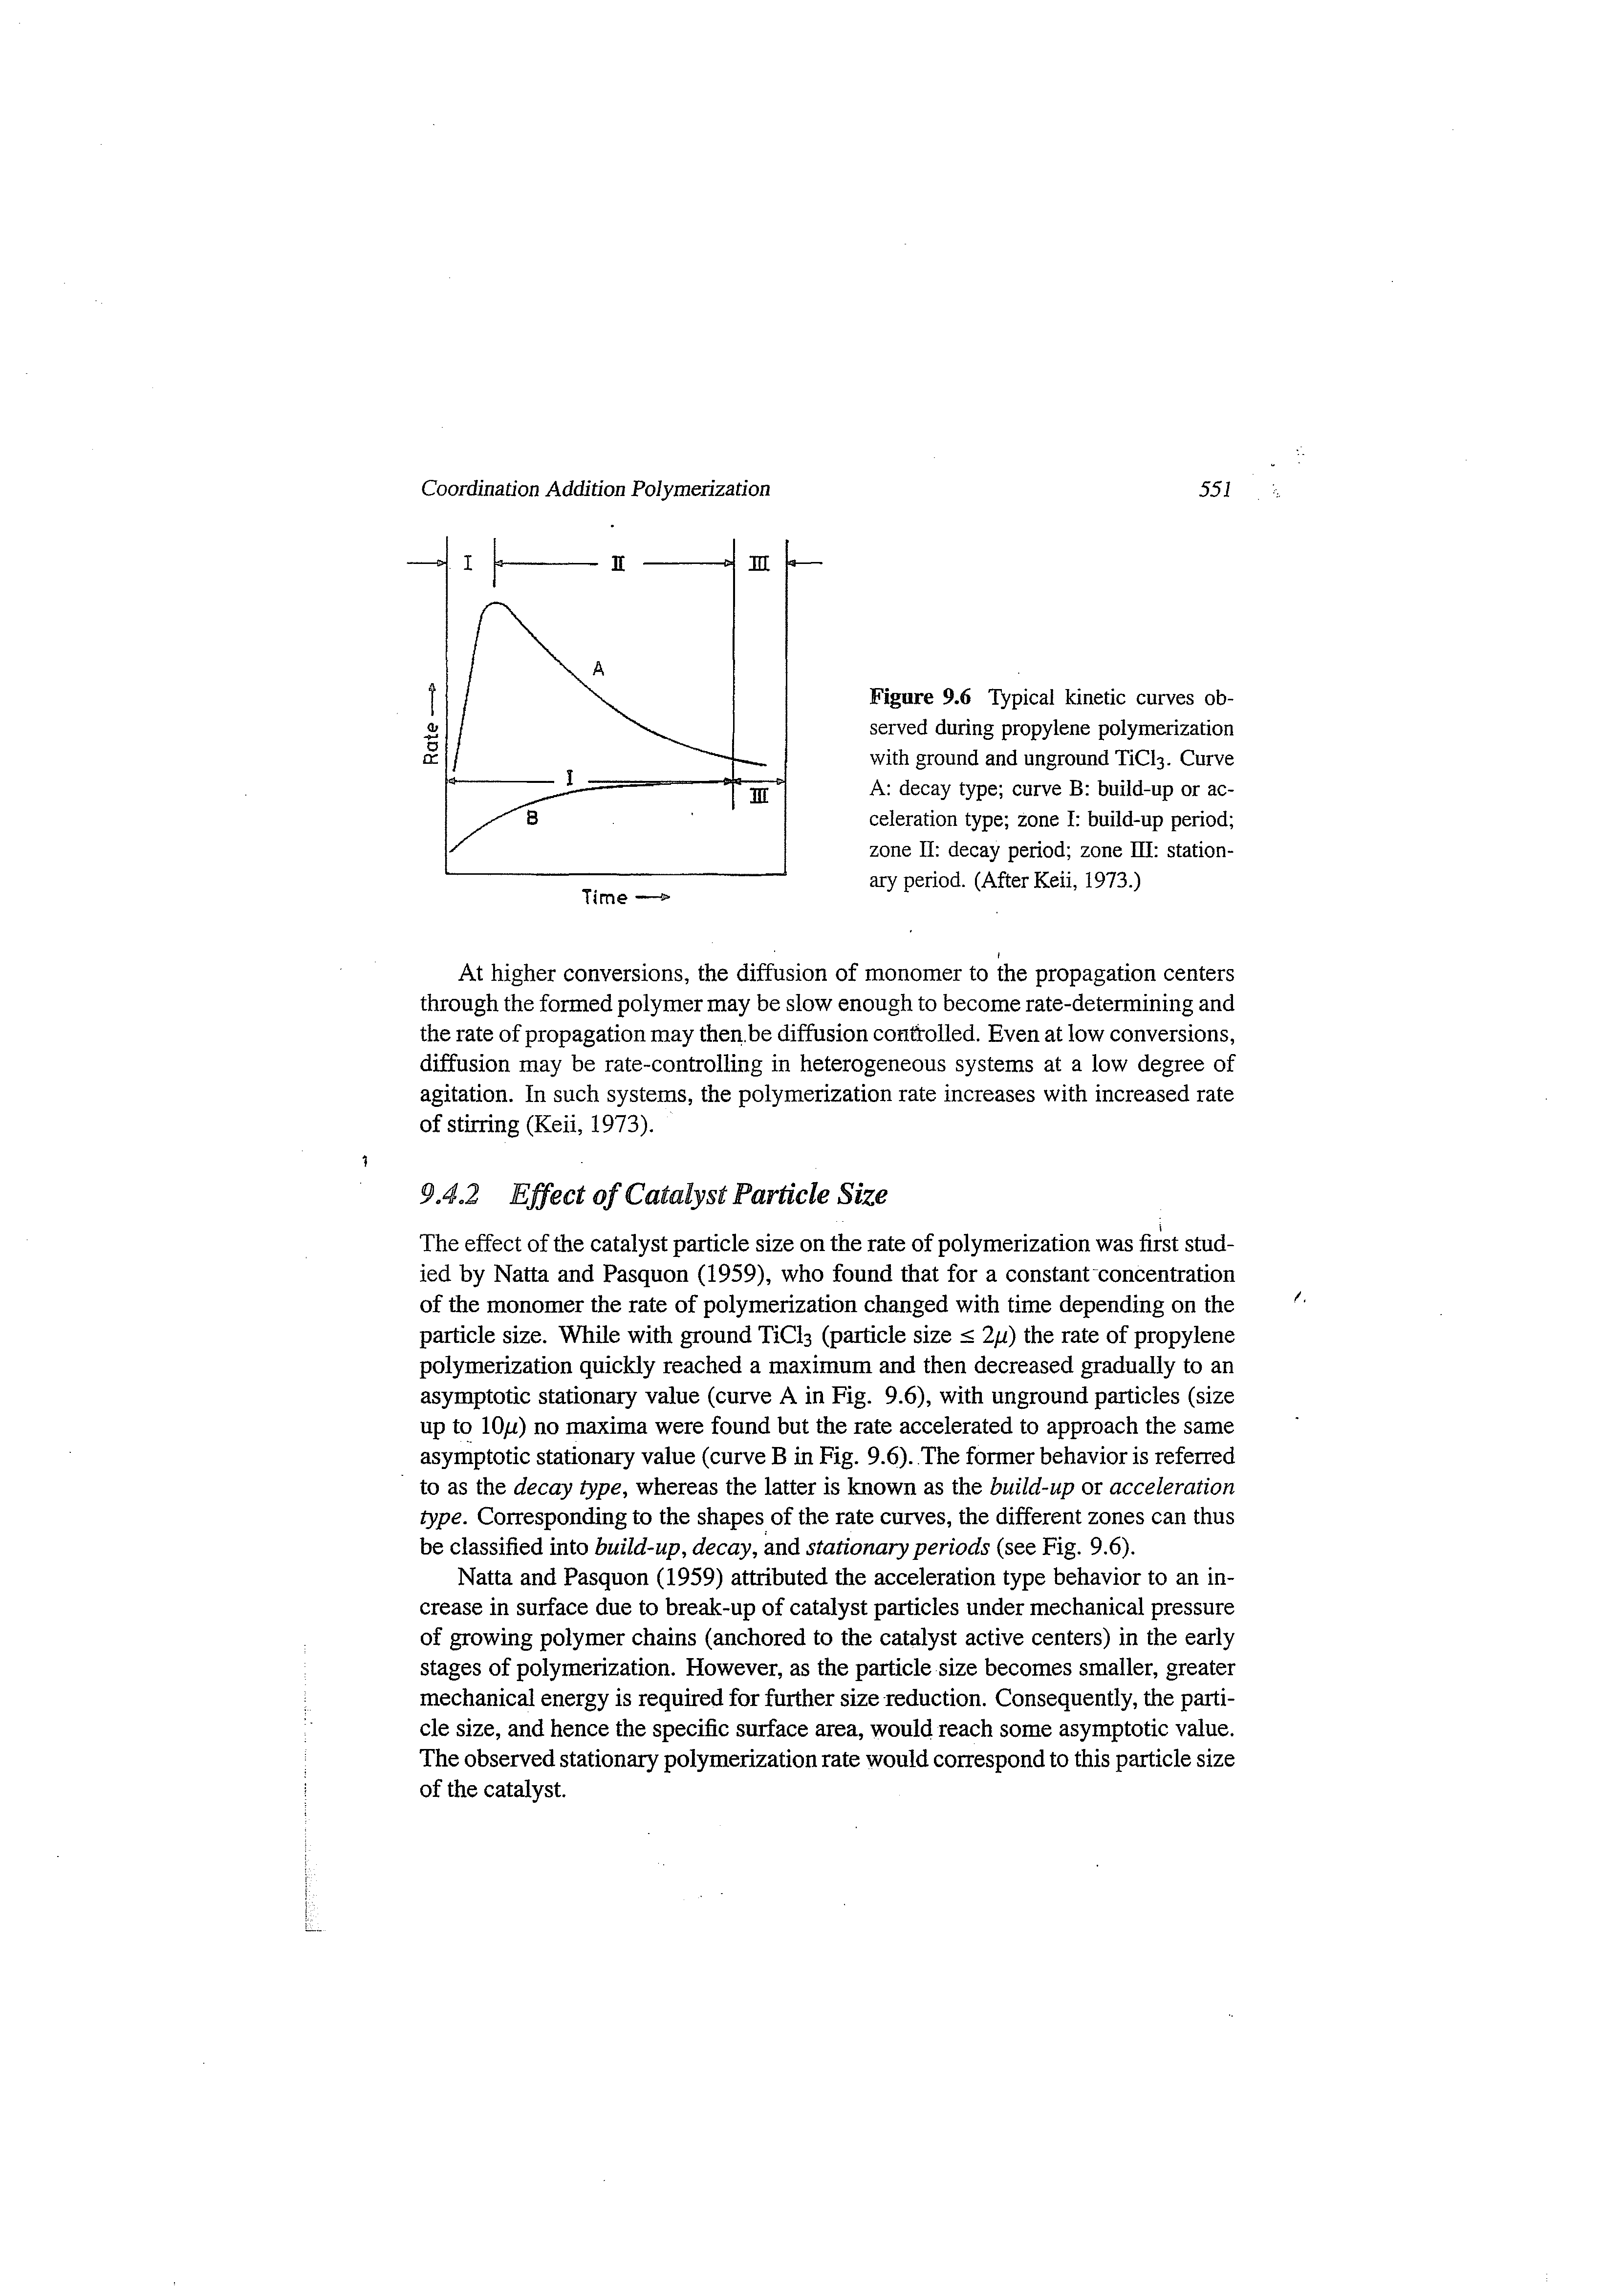 Figure 9.6 Typical kinetic curves observed during propylene polymerization with ground and unground TiCls- Curve A decay type curve B build-up or acceleration type zone I build-up period zone II decay period zone HI stationary period. (After Keii, 1973.)...